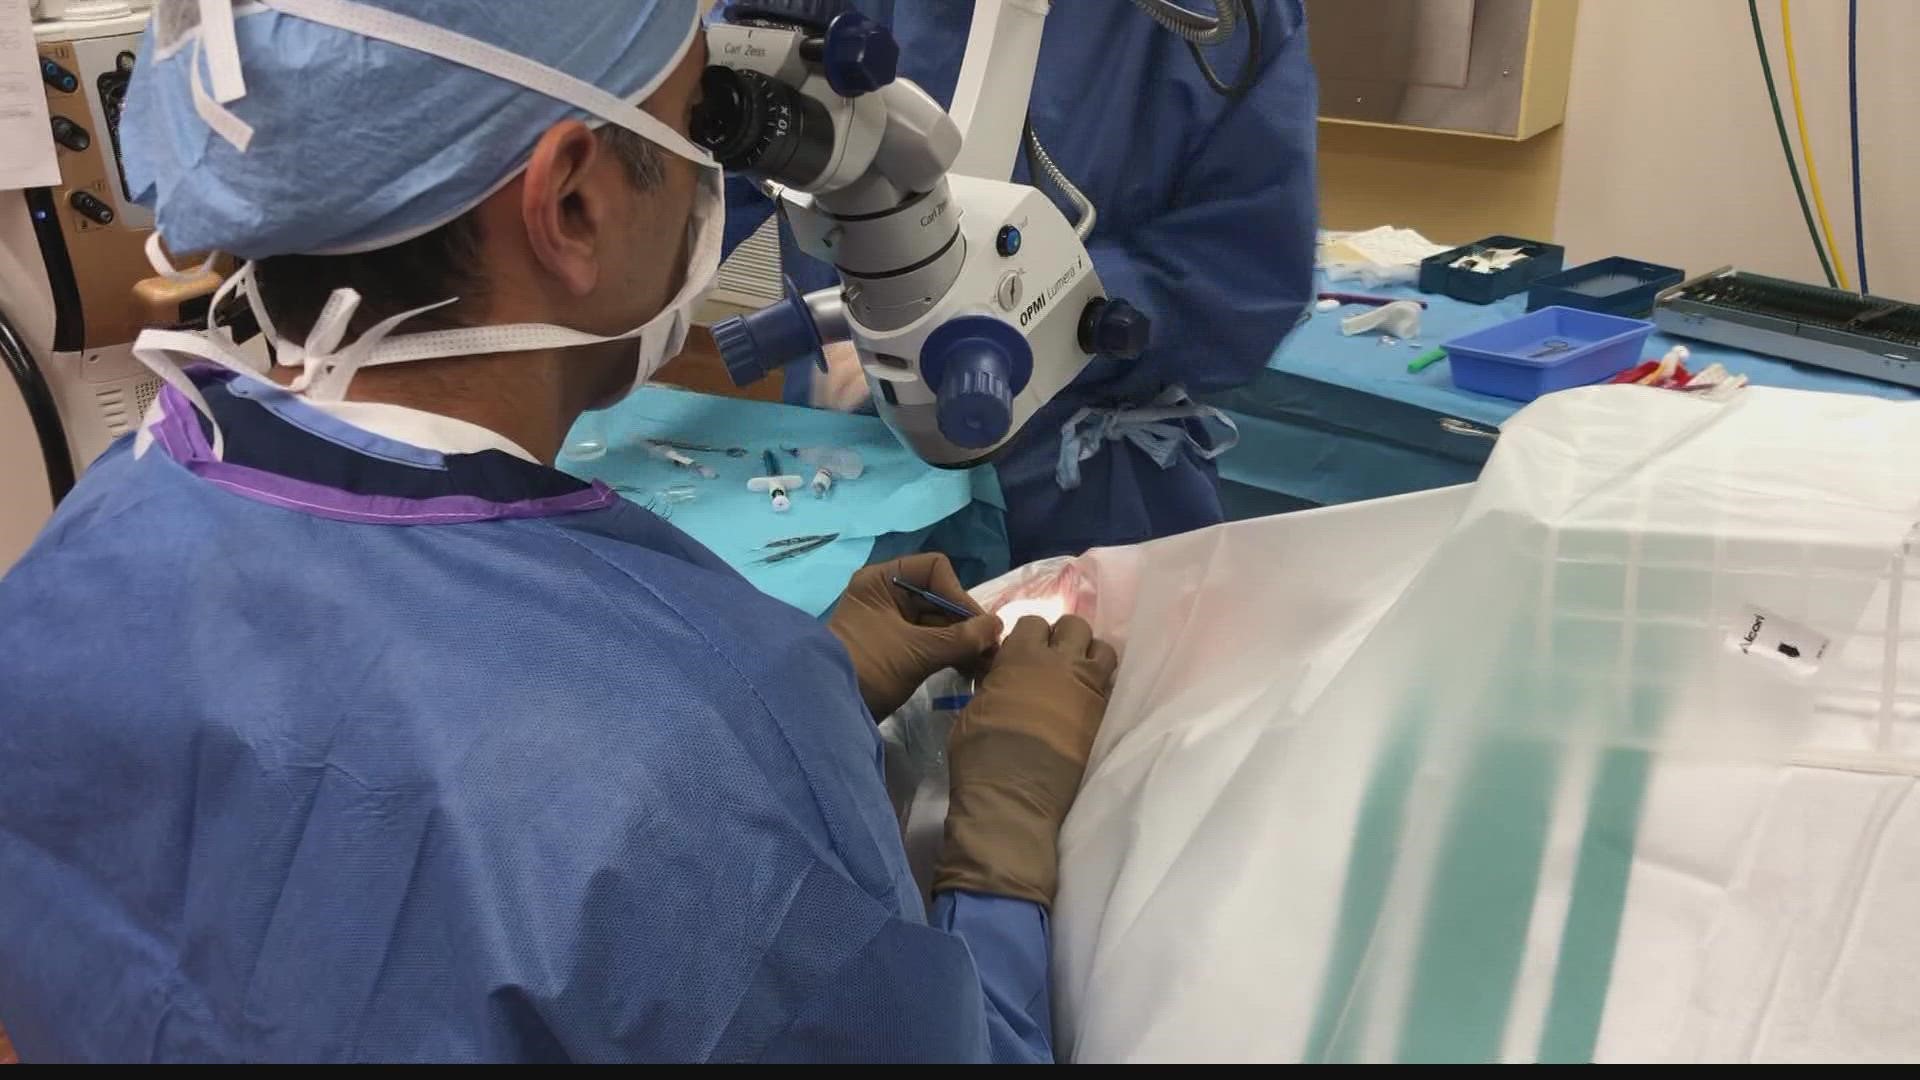 The FDA has approved EVO Visian ICL in March of 2022, but millions of people have received the implant around the world.